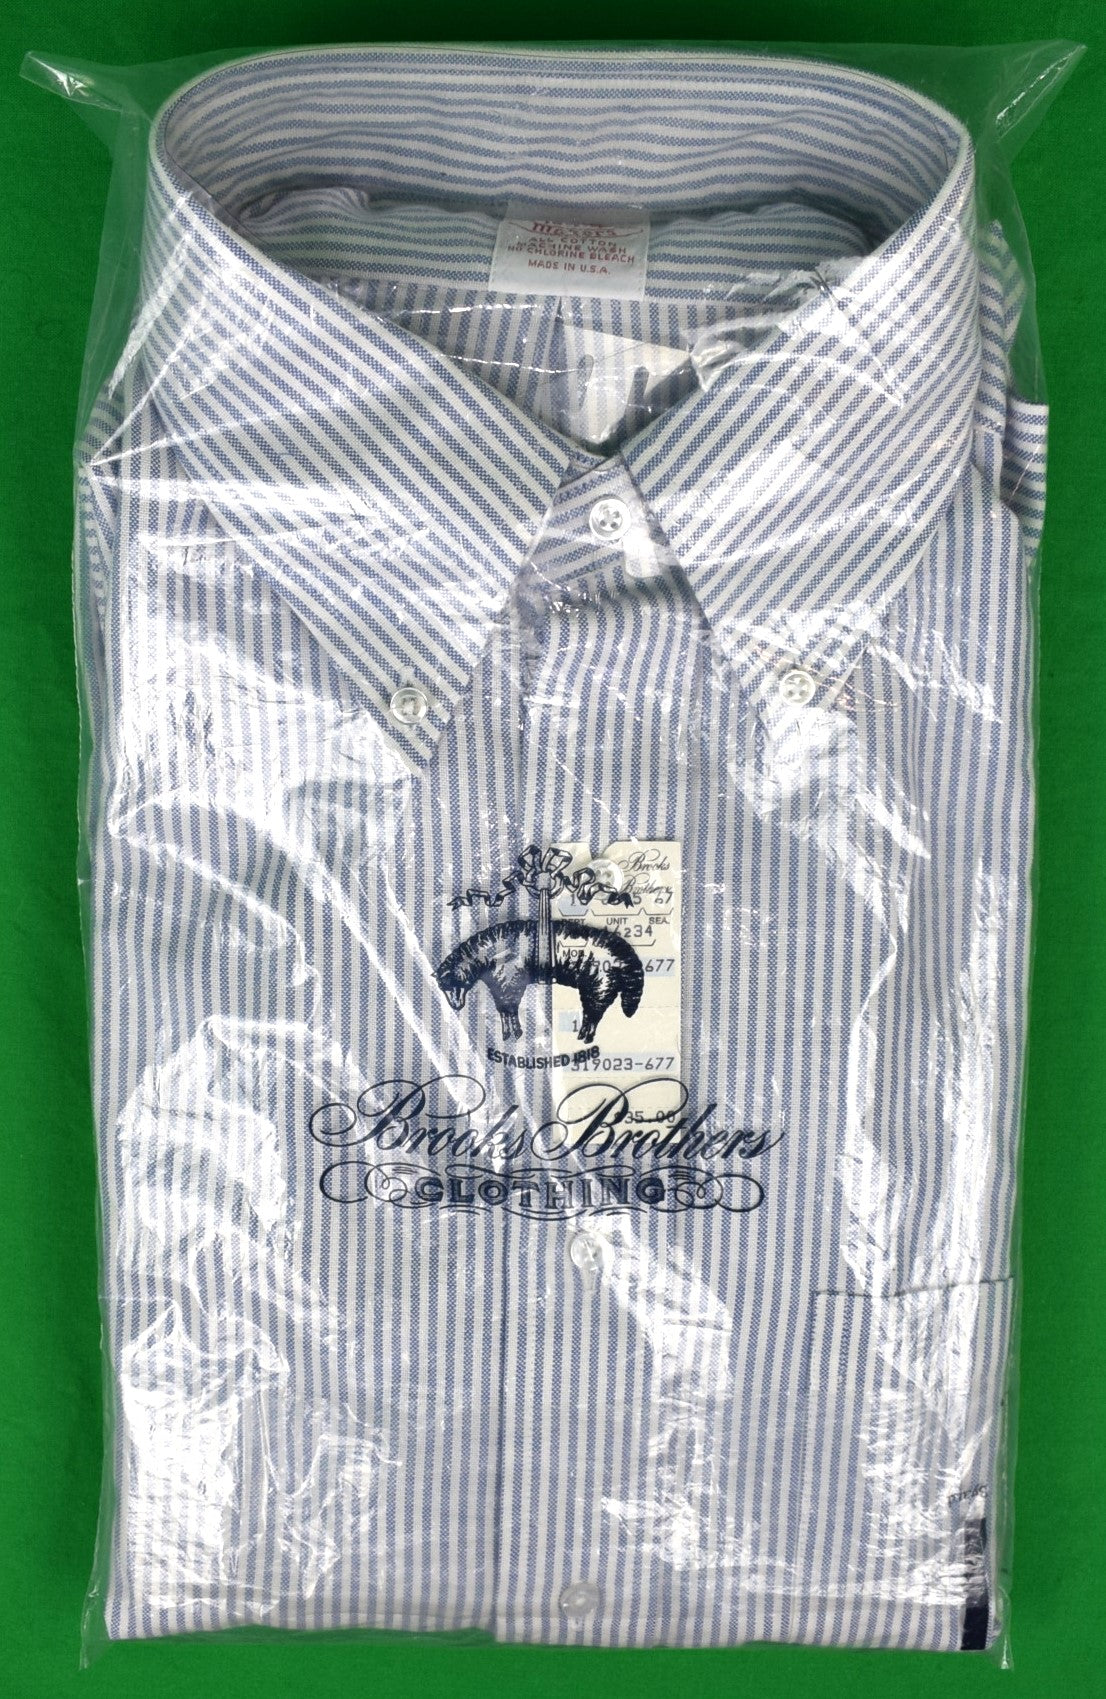 Brooks Brothers Blue Candy Stripe OCBD c1980s Shirt Sz 16 1/2- 4 (DEADSTOCK w/ Tag) (SOLD)